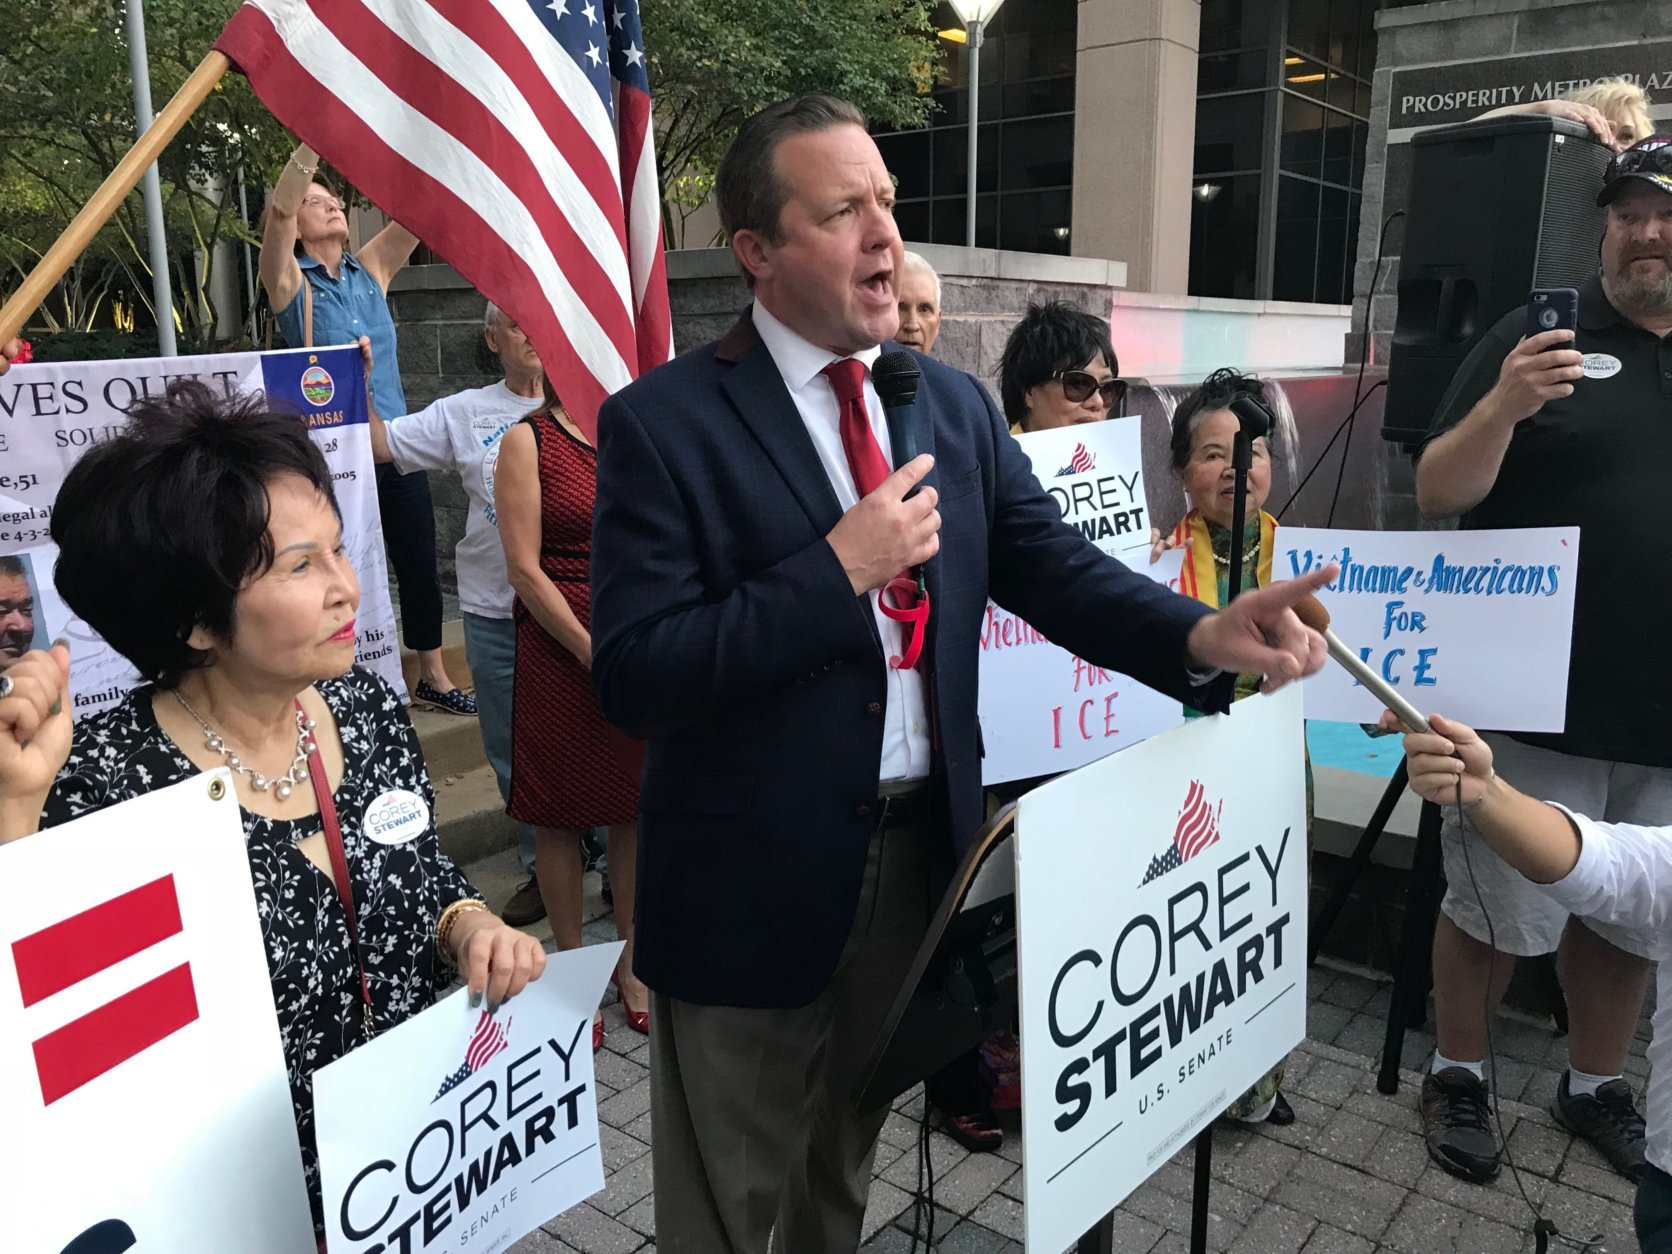 Republican Corey Stewart, who is running for U.S. Senate in Virginia, organized a pro-ICE rally in Fairfax, Virginia, on Tuesday, Oct. 9, 2018. The rally also attracted protesters. (WTOP/Michelle Basch)